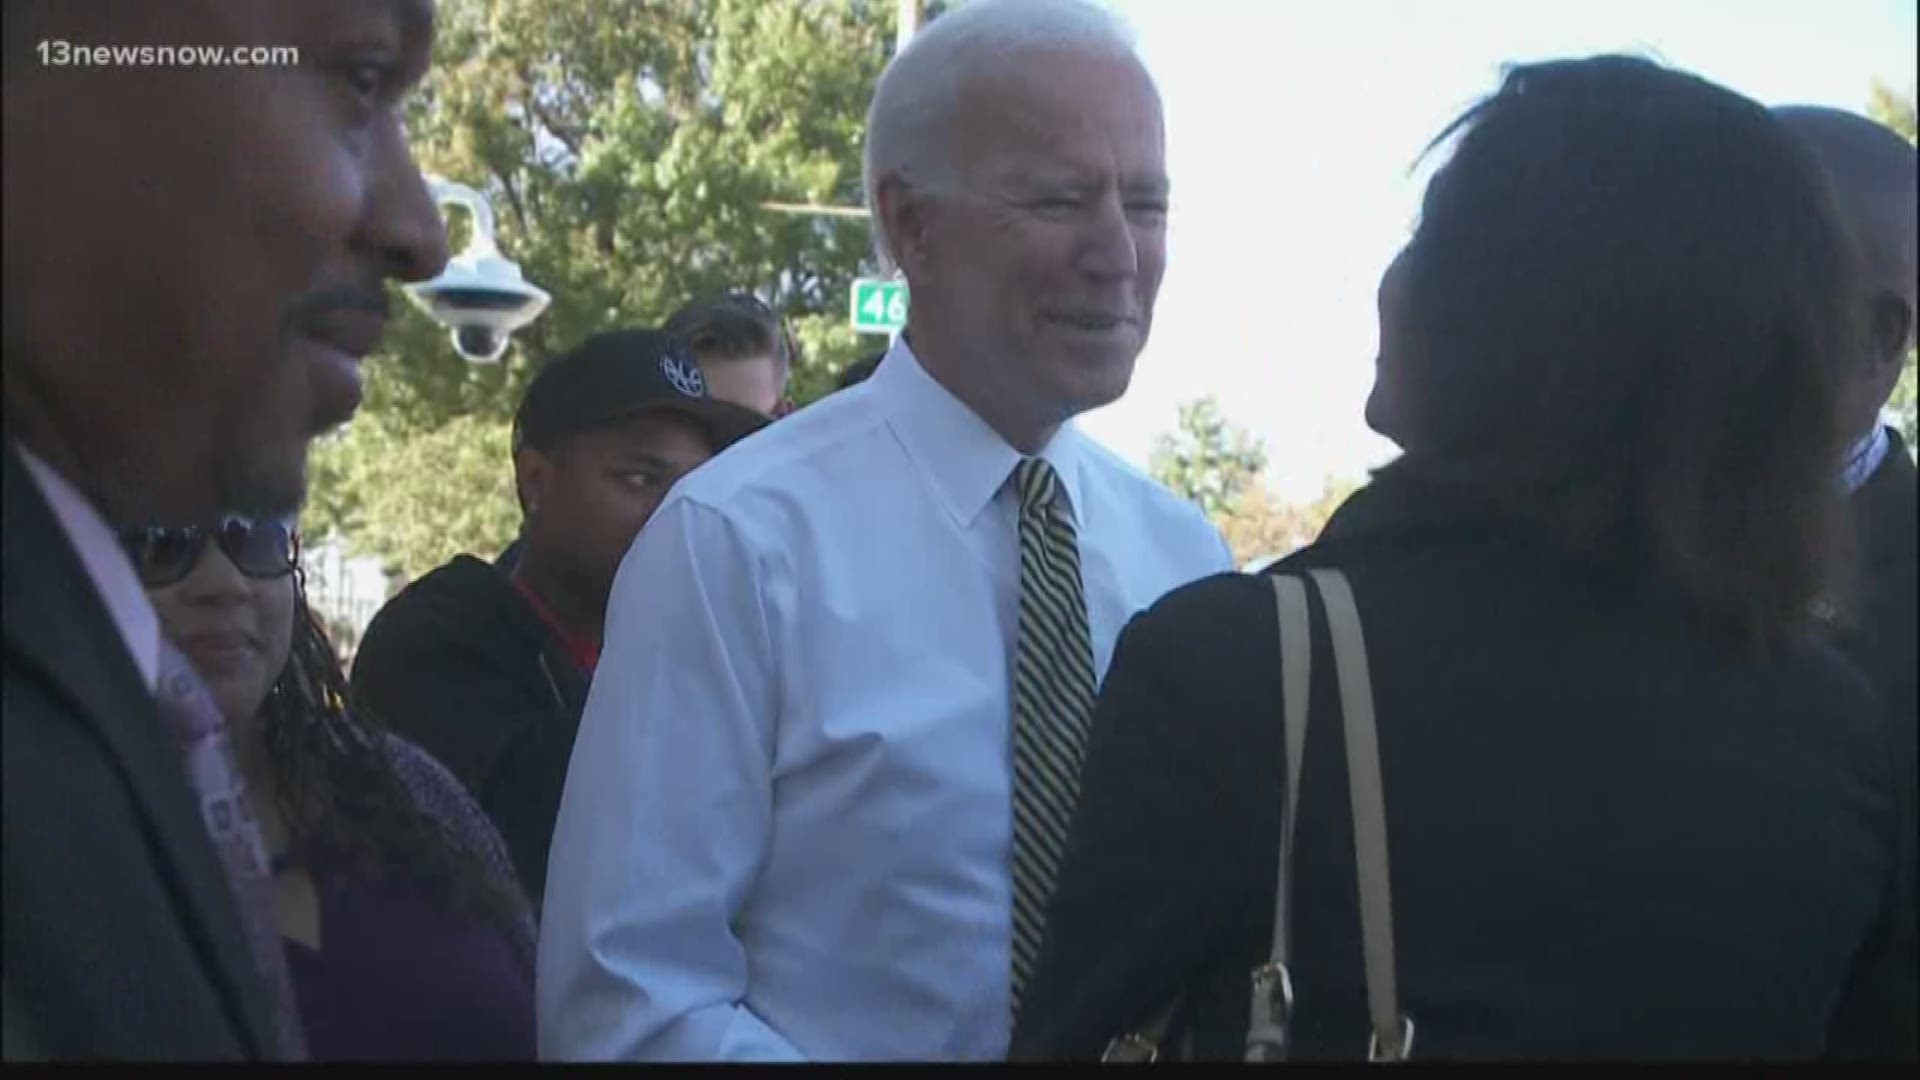 13News Now Chenue Her has more on the Bidens' visit to Newport News Shipbuilding.